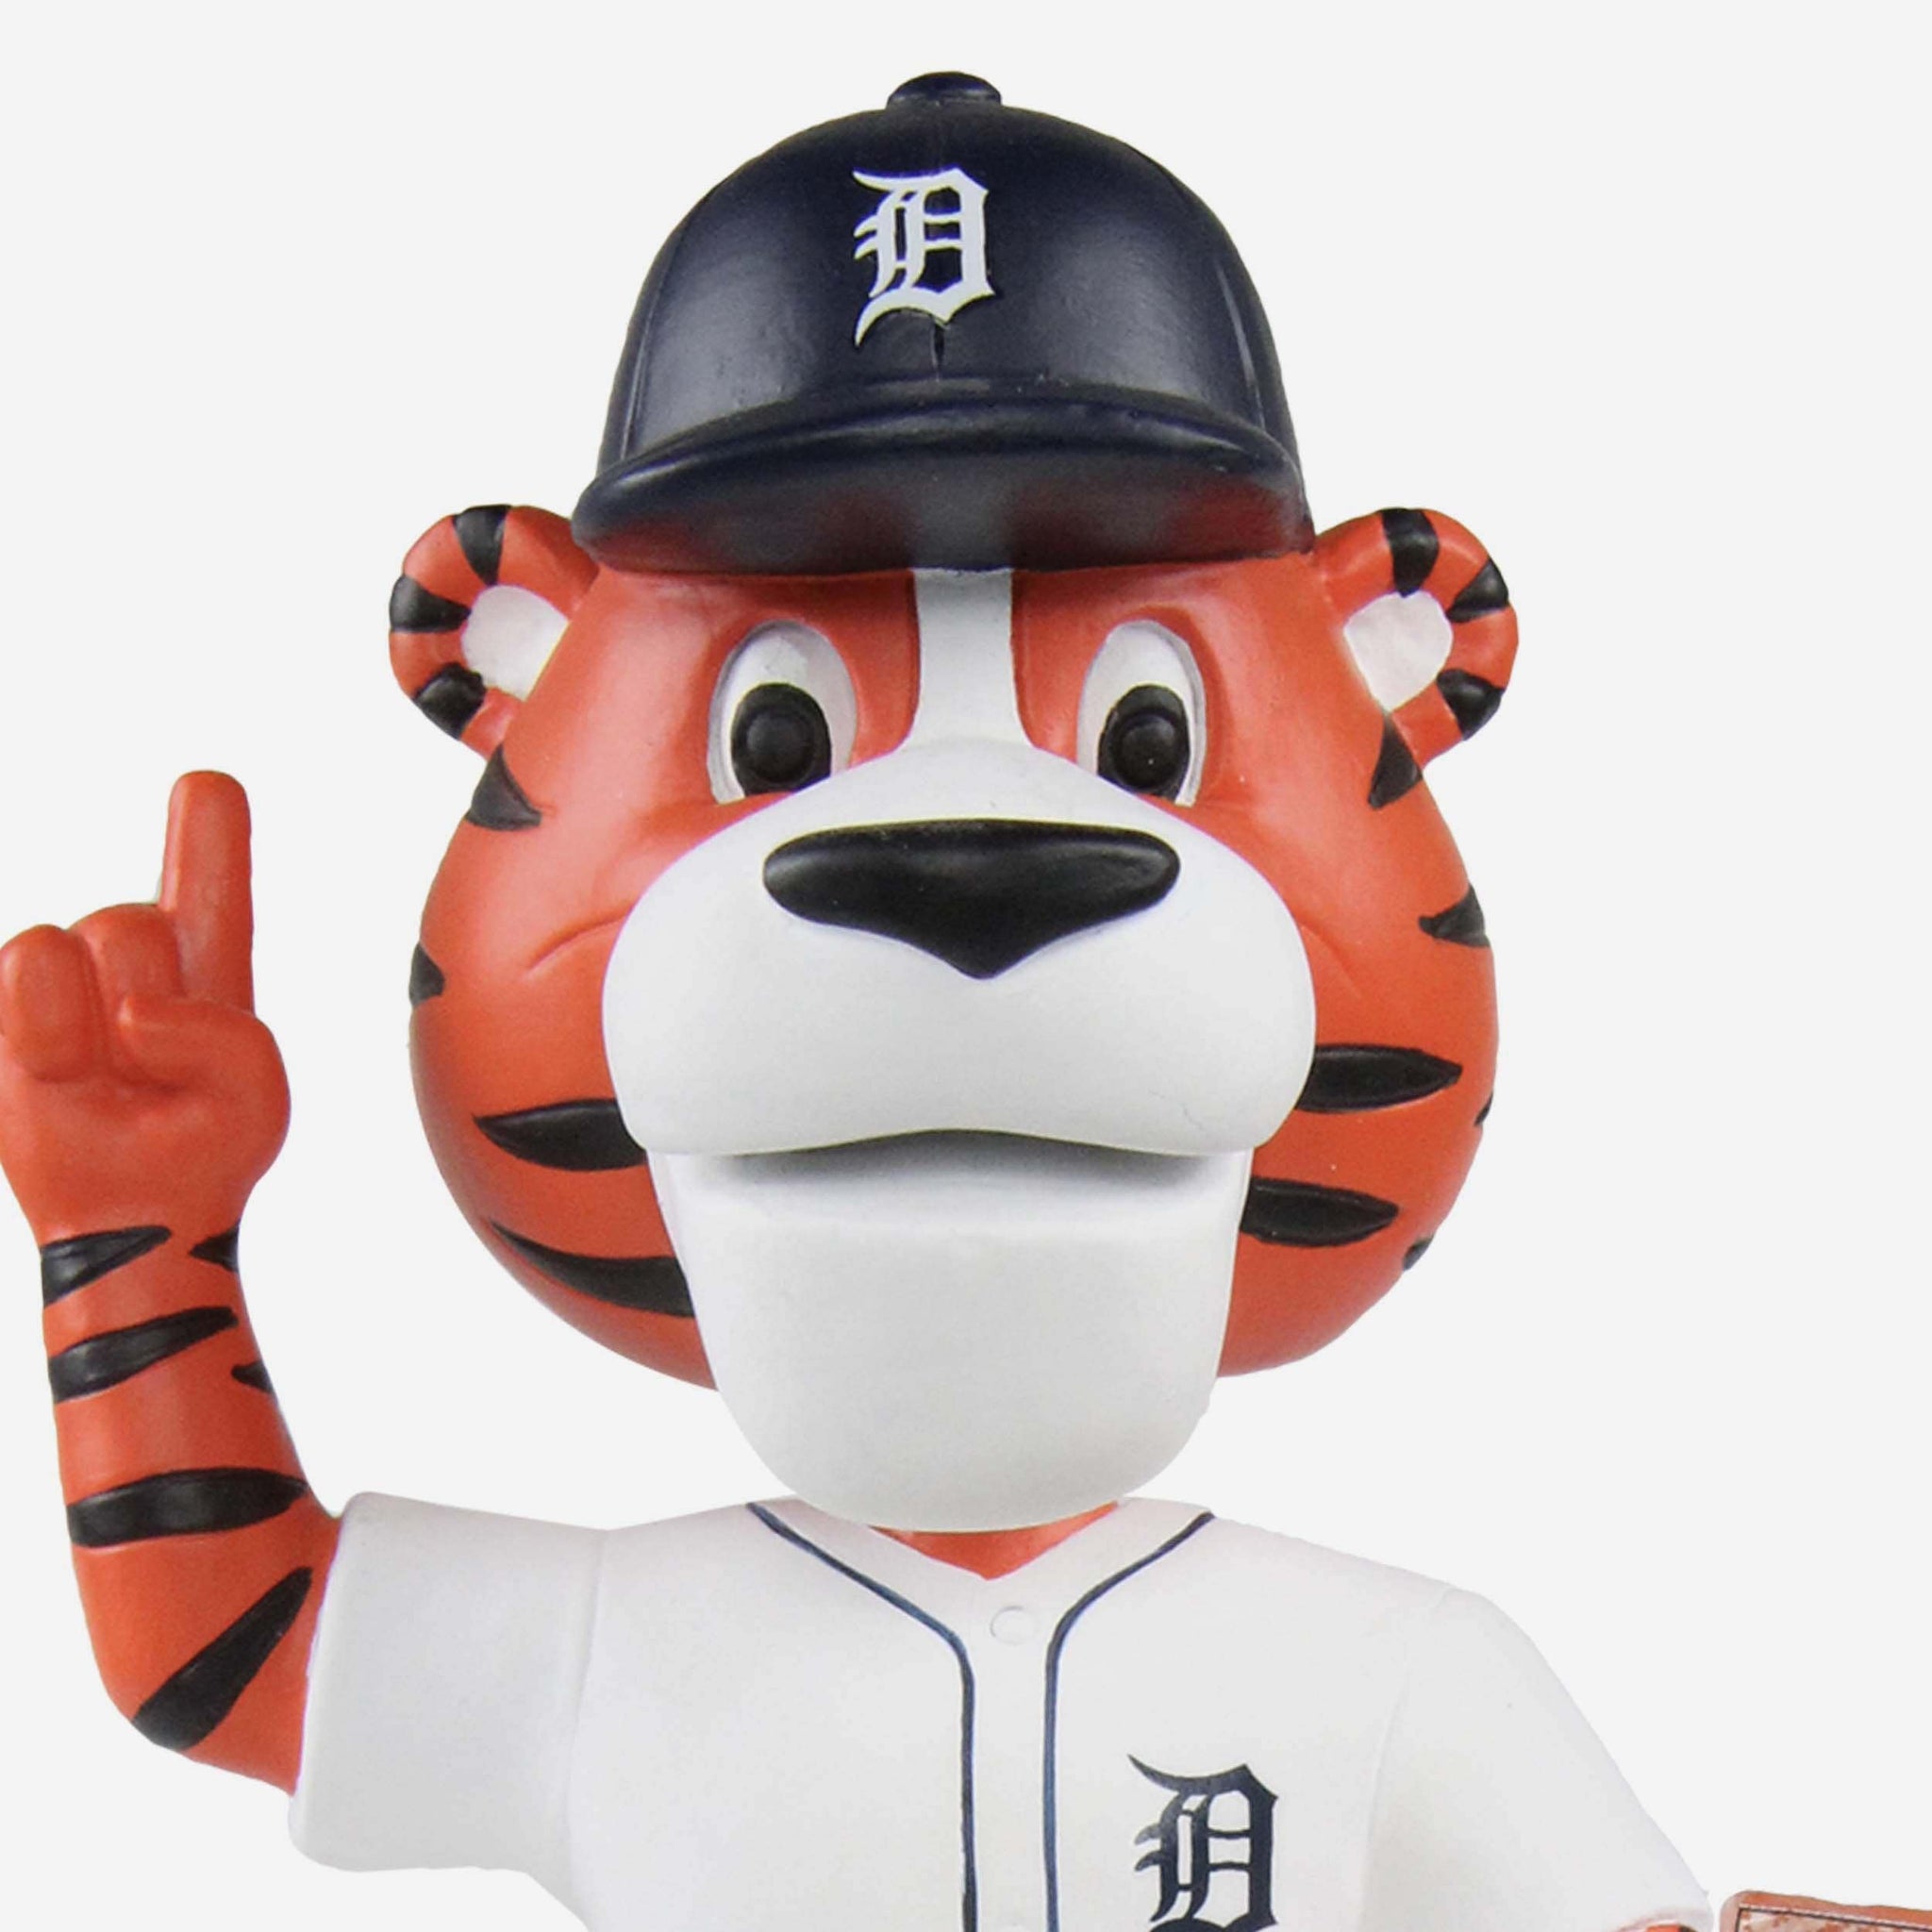 Paws the tigers mascot see what happens when you tic tok famest ok he